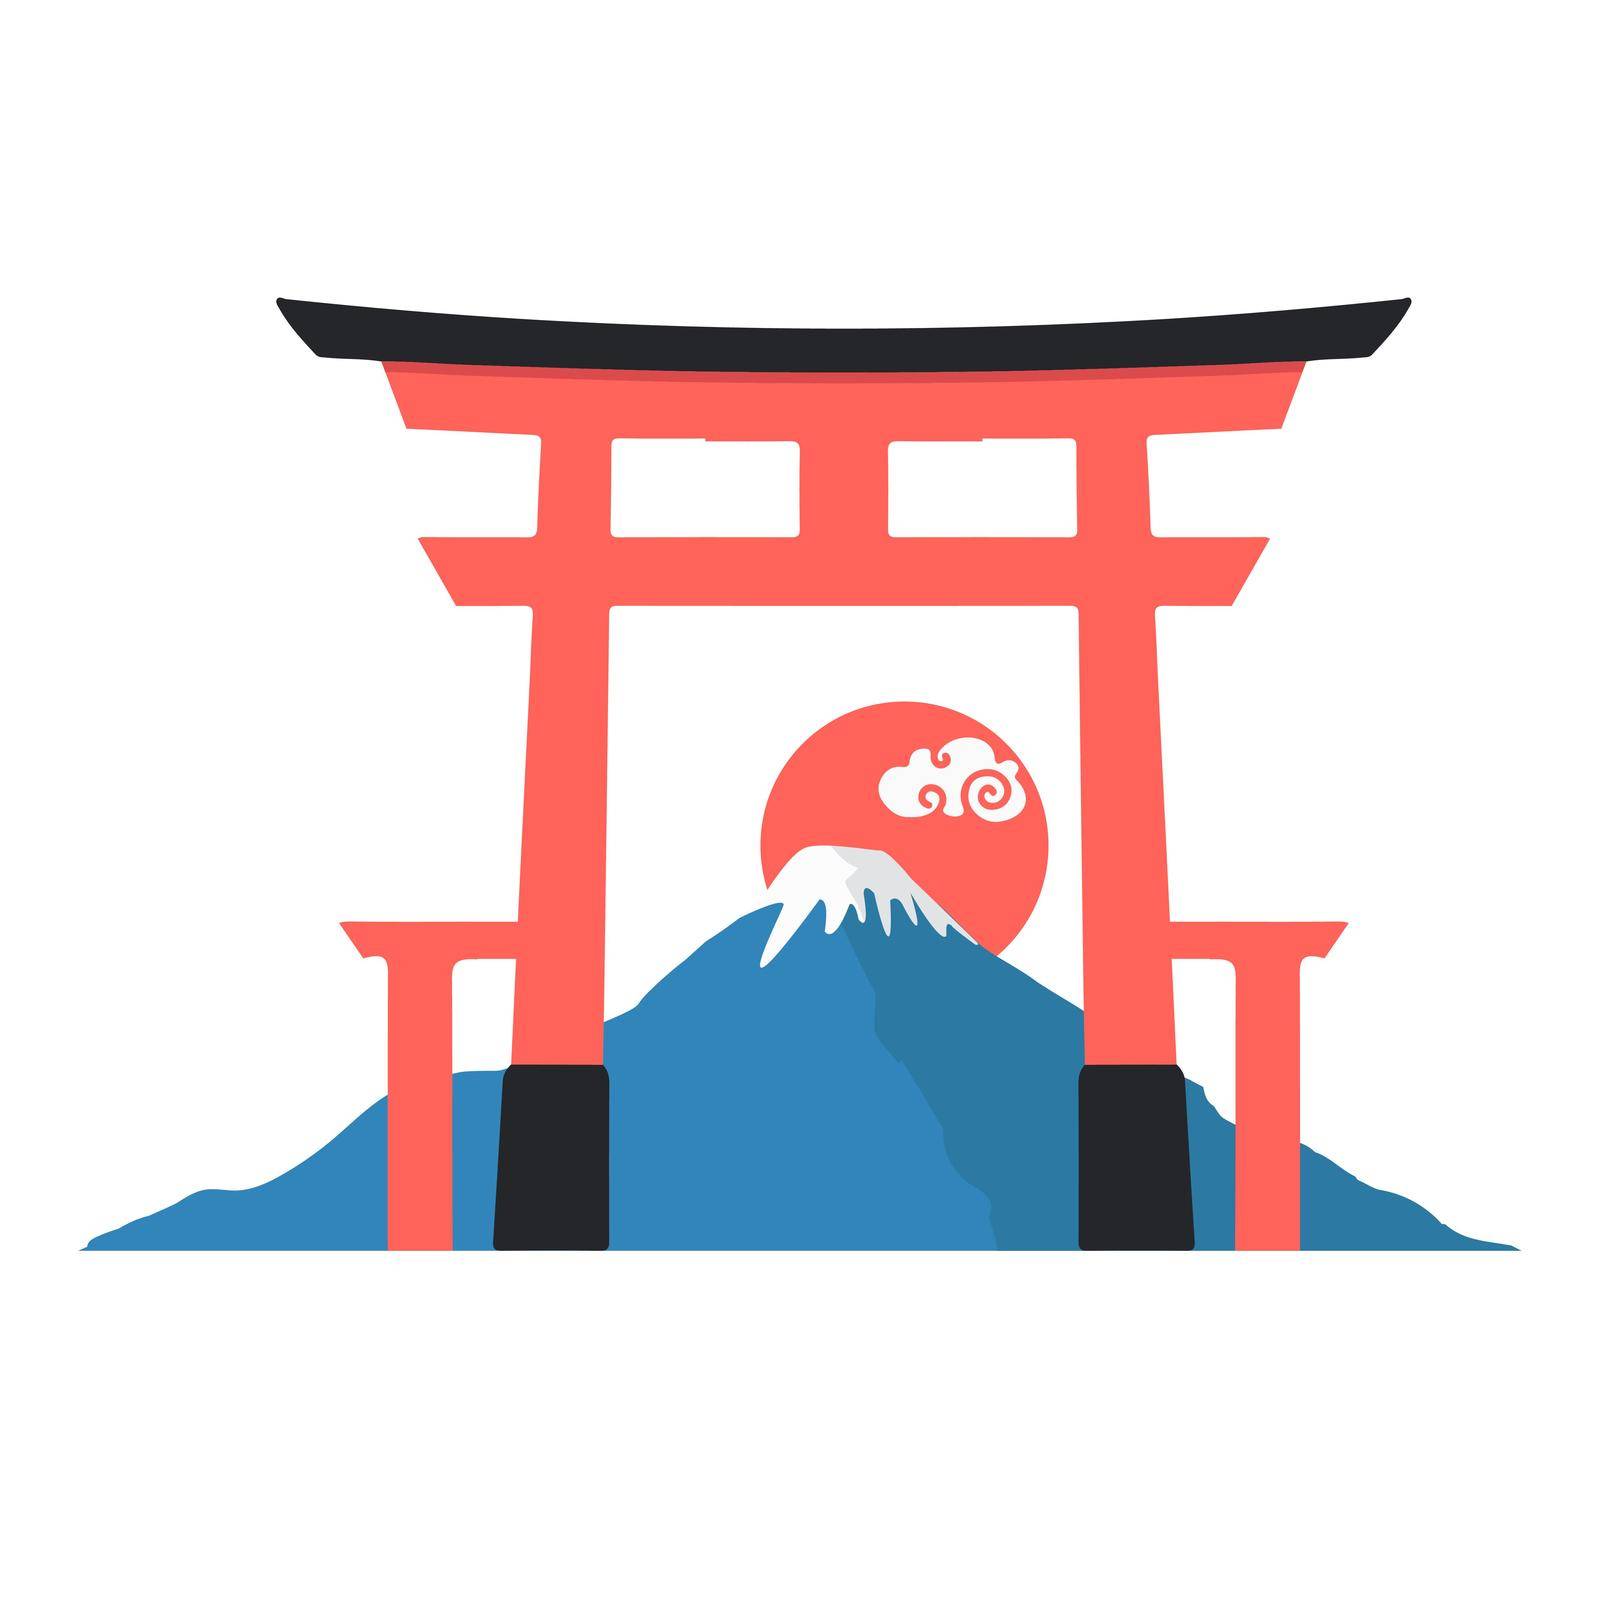 Mount Fuji red sun with torii gate icon by focus_bell